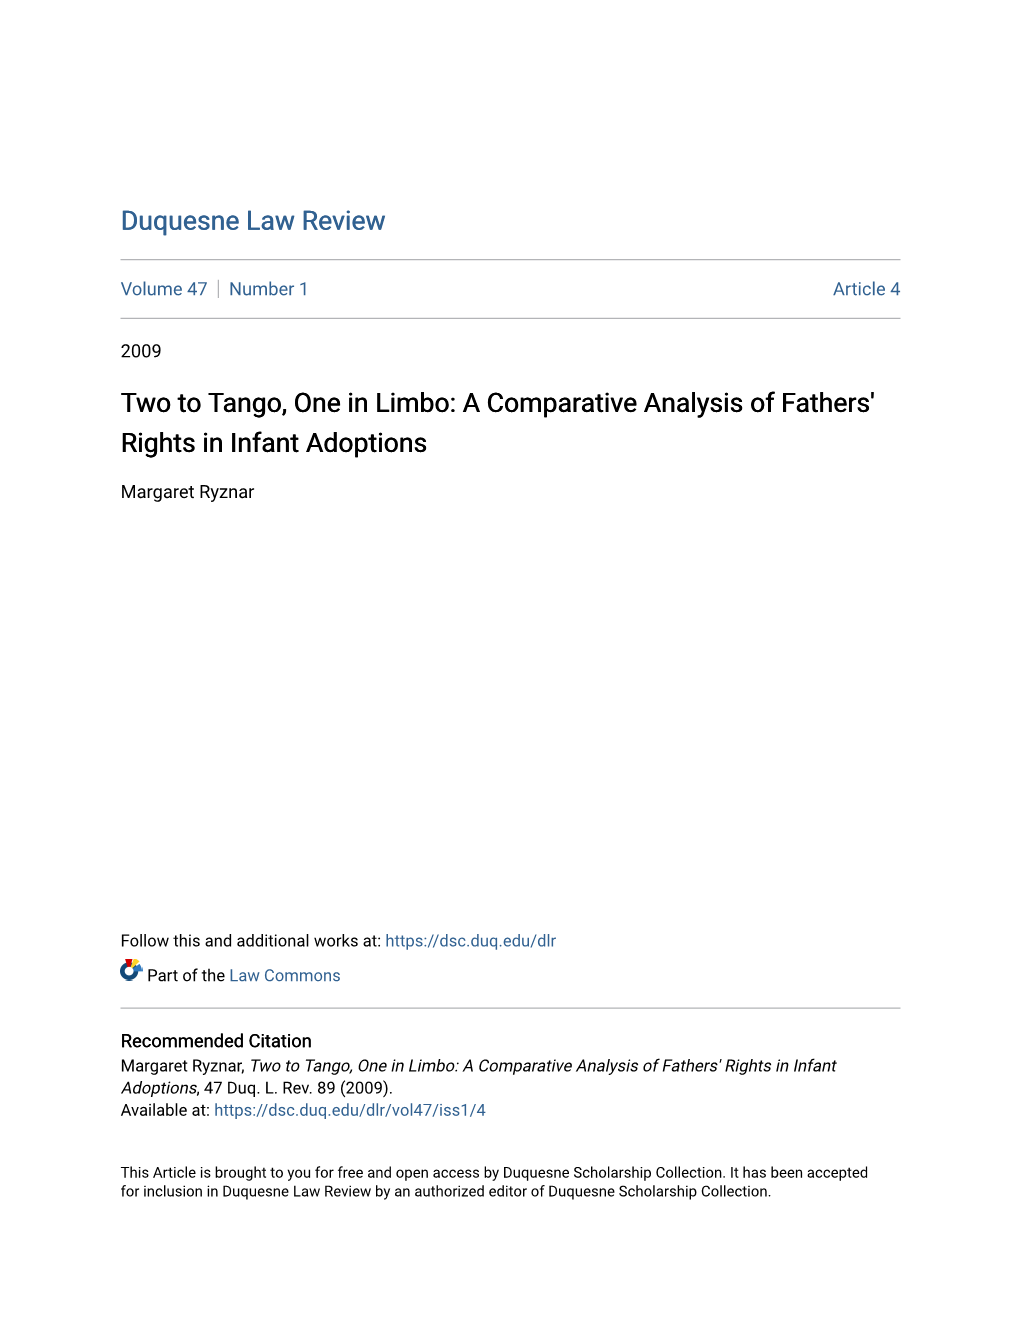 A Comparative Analysis of Fathers' Rights in Infant Adoptions